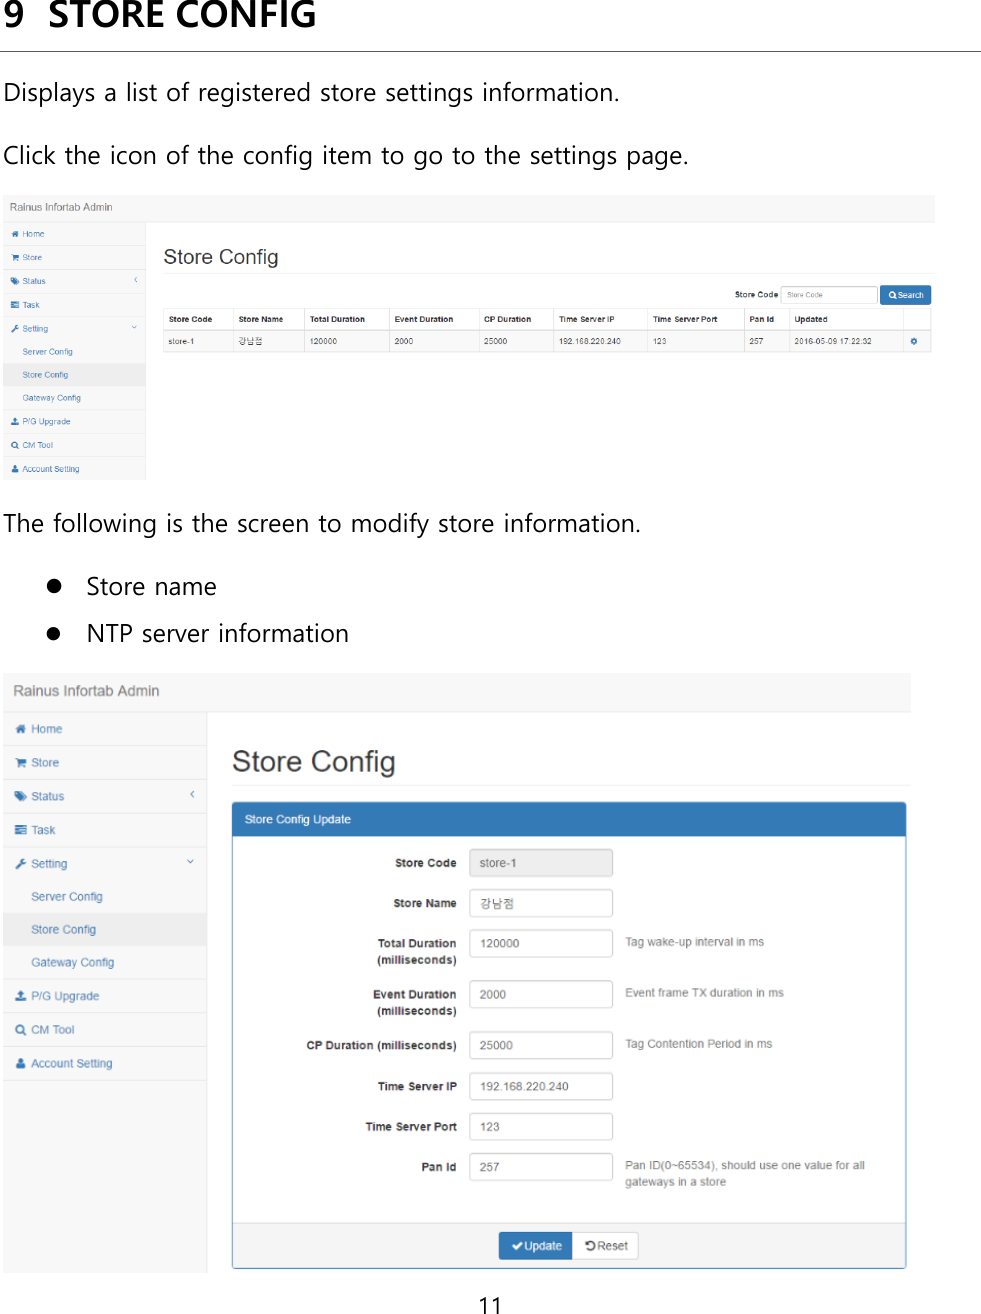 11  9 STORE CONFIG Displays a list of registered store settings information. Click the icon of the config item to go to the settings page.  The following is the screen to modify store information. ⚫ Store name ⚫ NTP server information  